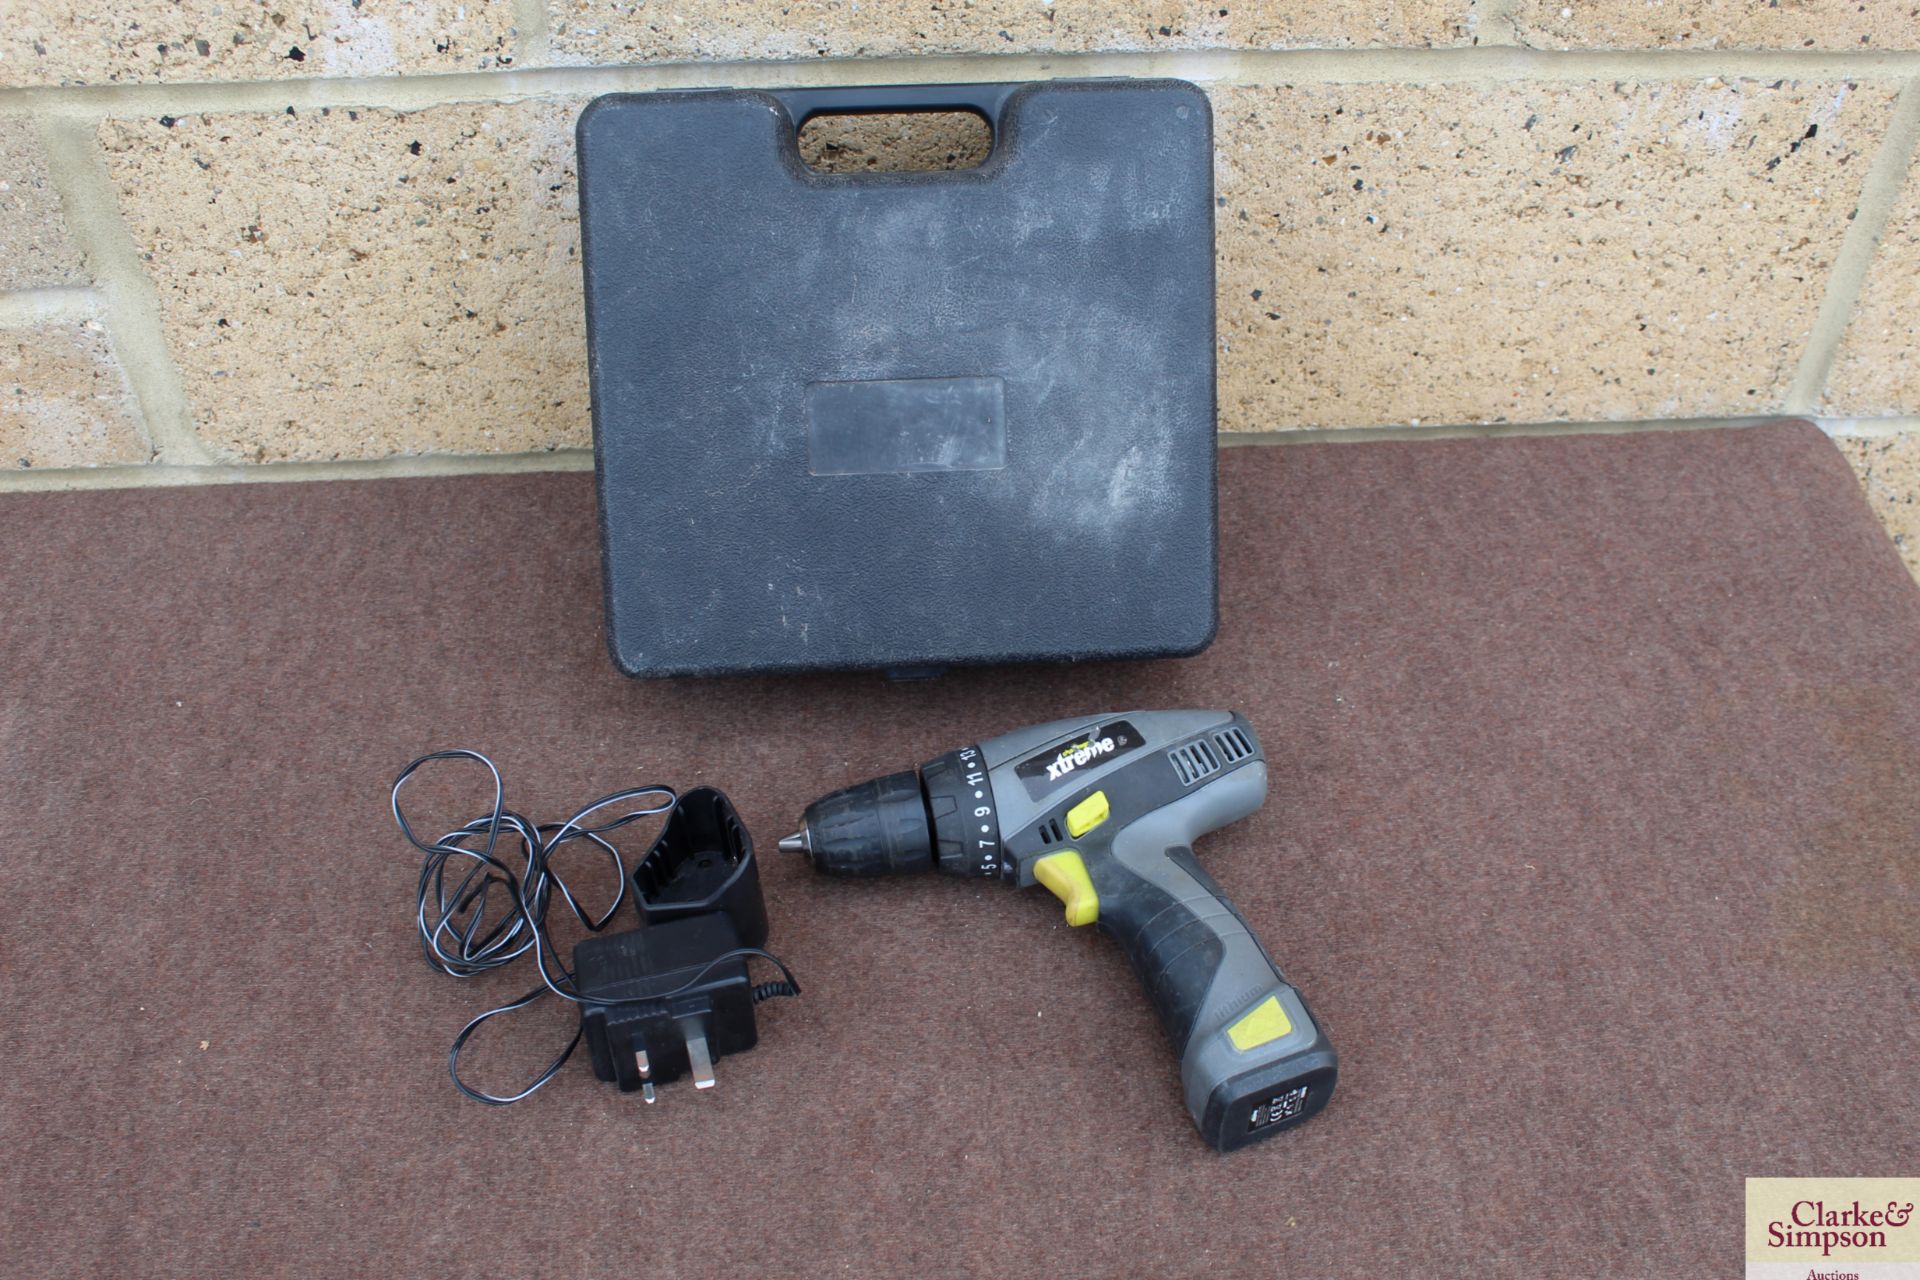 Challenge Xtreme PT100116 10.8v cordless drill with battery and charger in case.